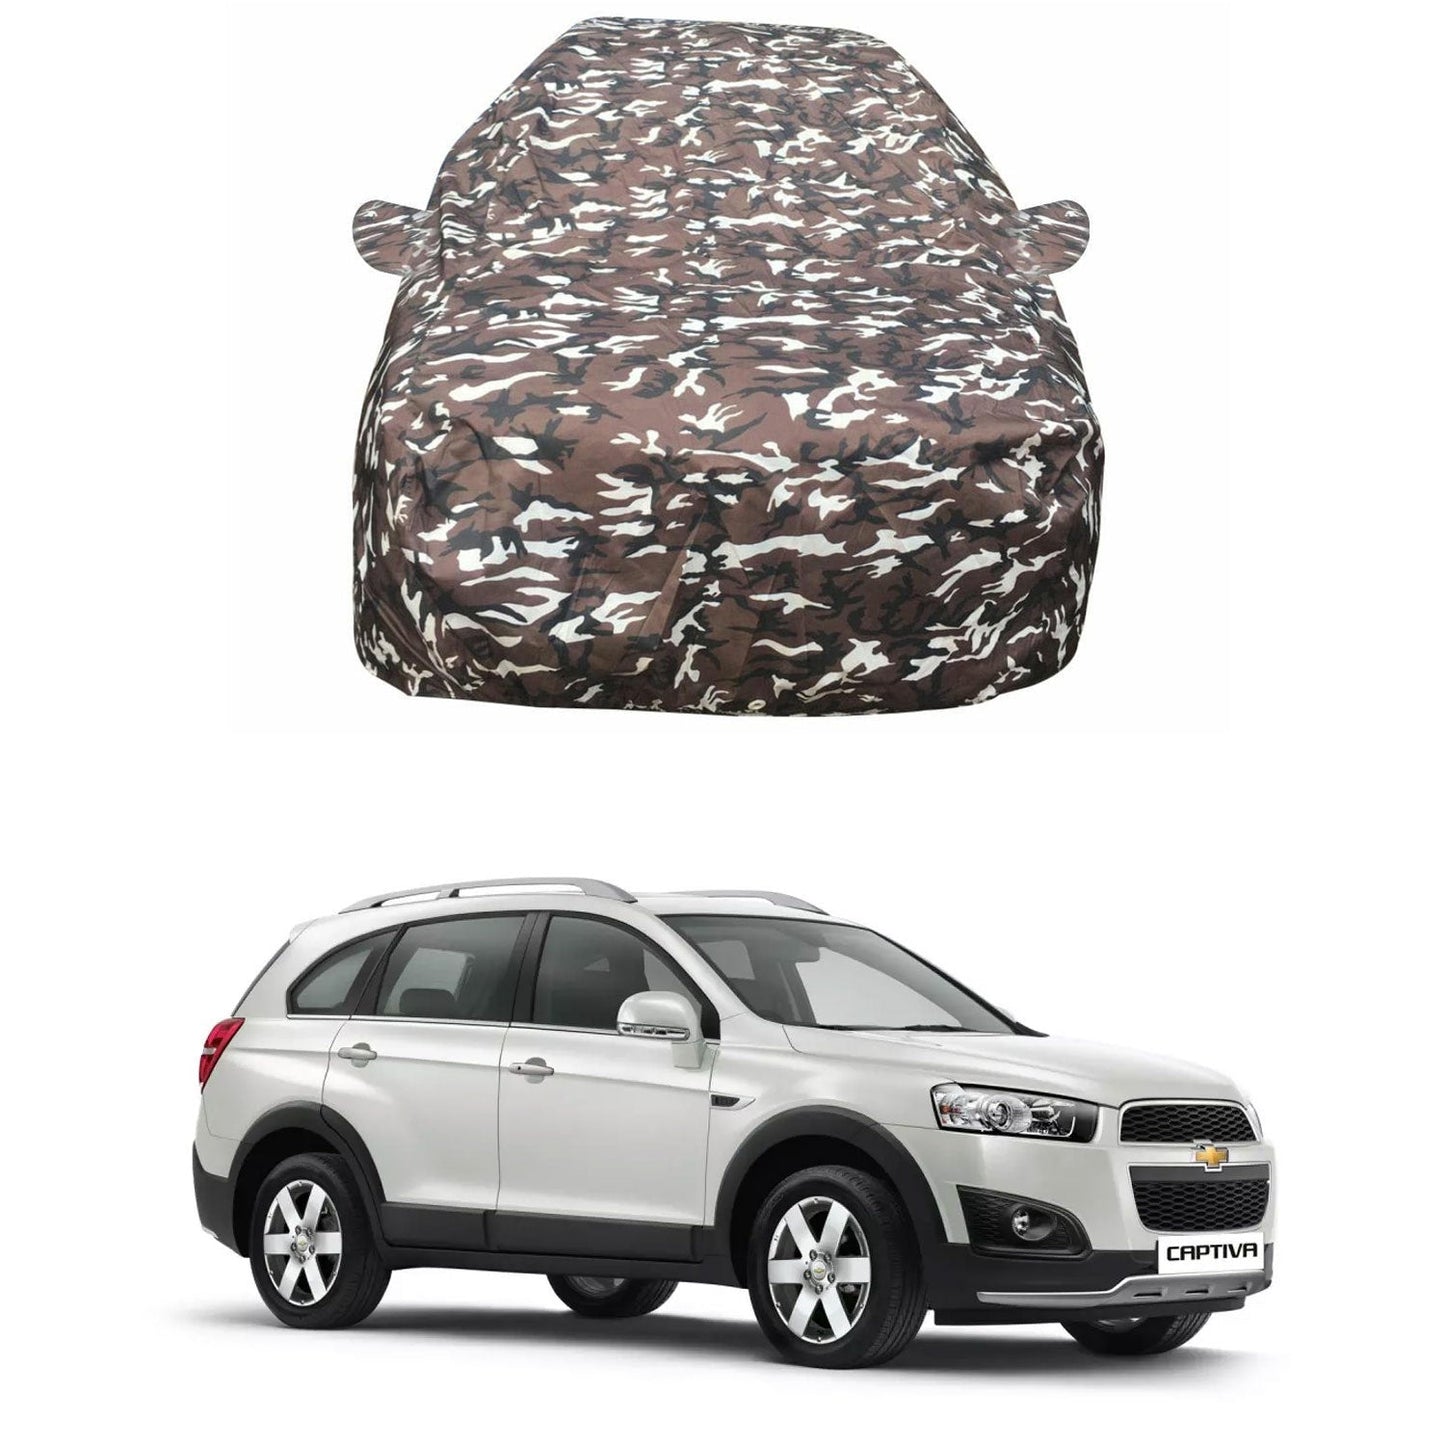 Oshotto Ranger Design Made of 100% Waterproof Fabric Car Body Cover with Mirror Pocket For Chevrolet Captiva